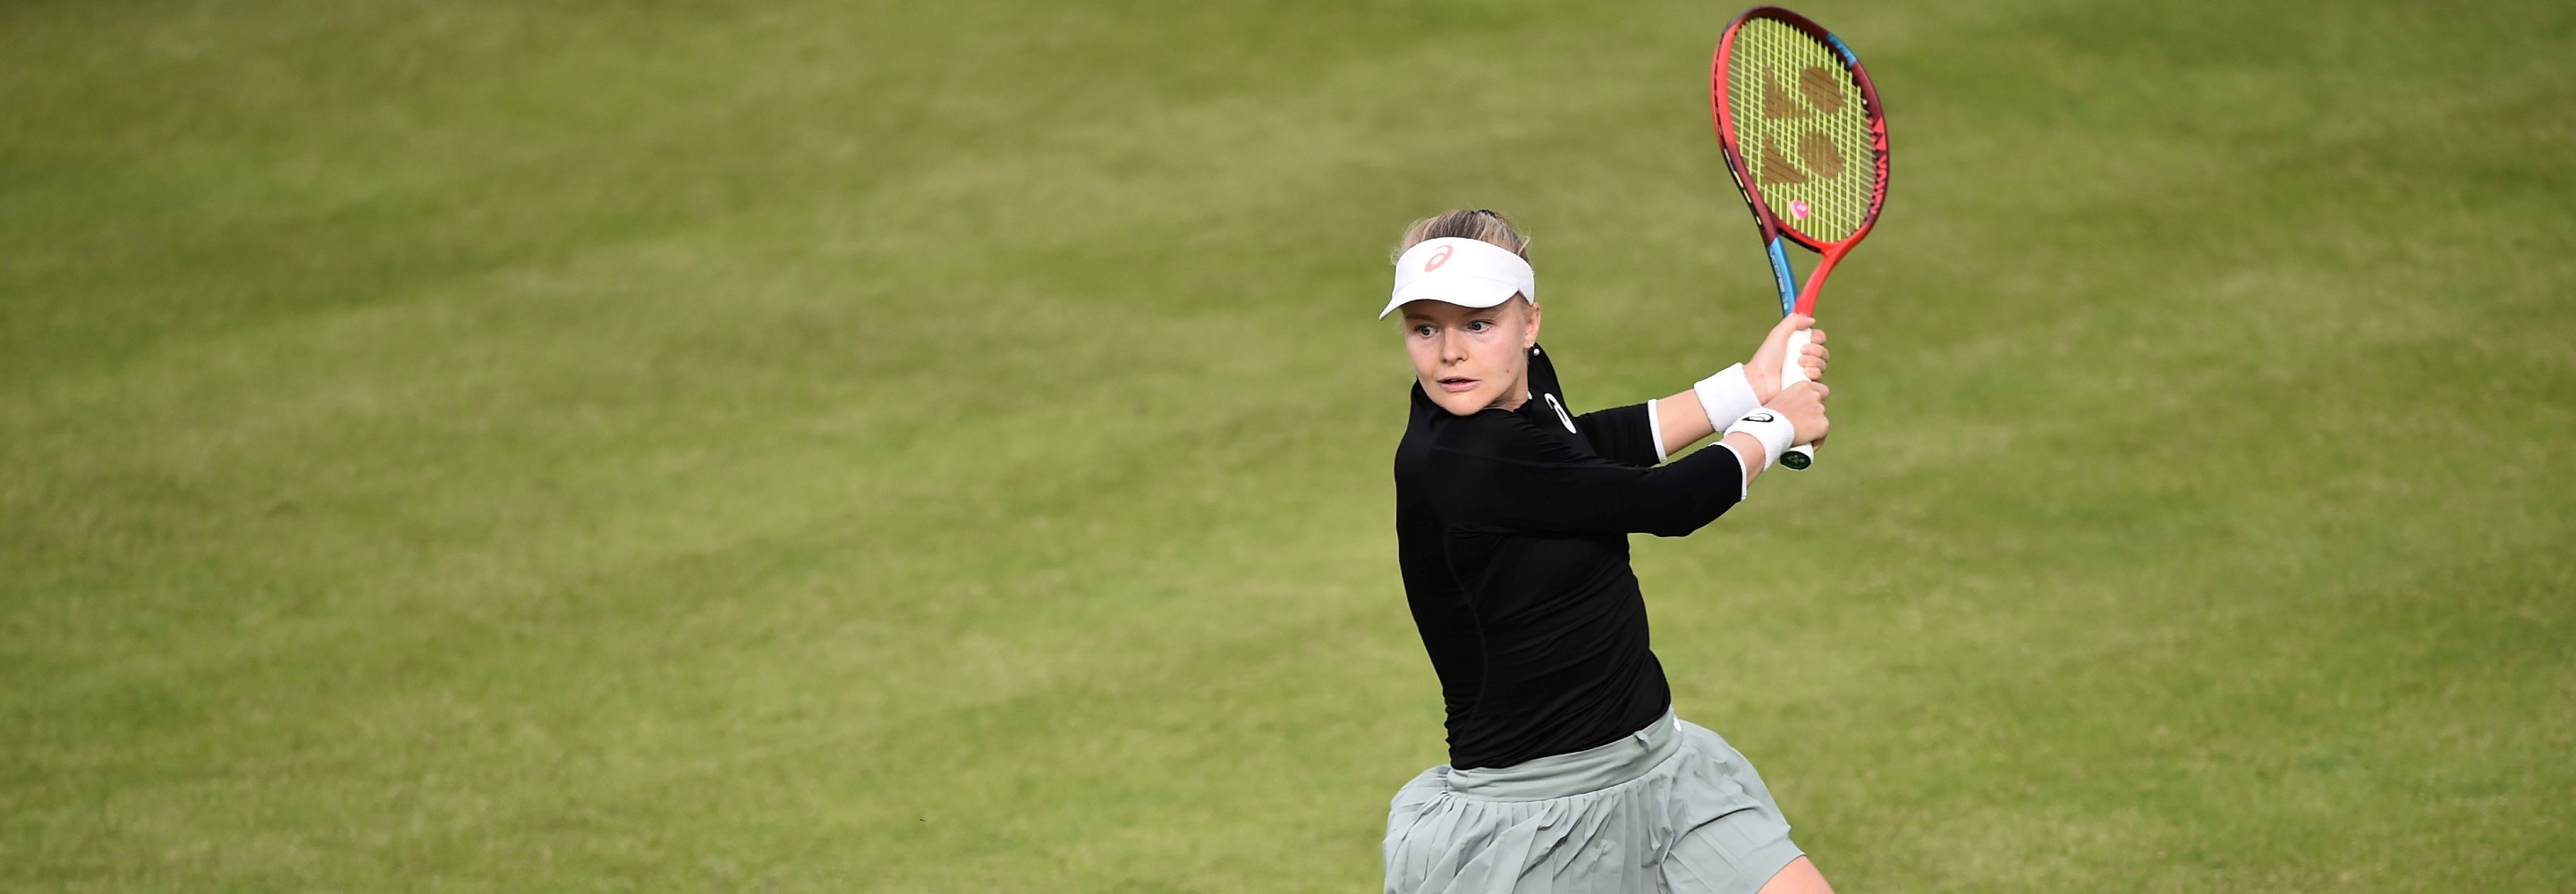 Harriet Dart of Great Britain plays a forehand shot